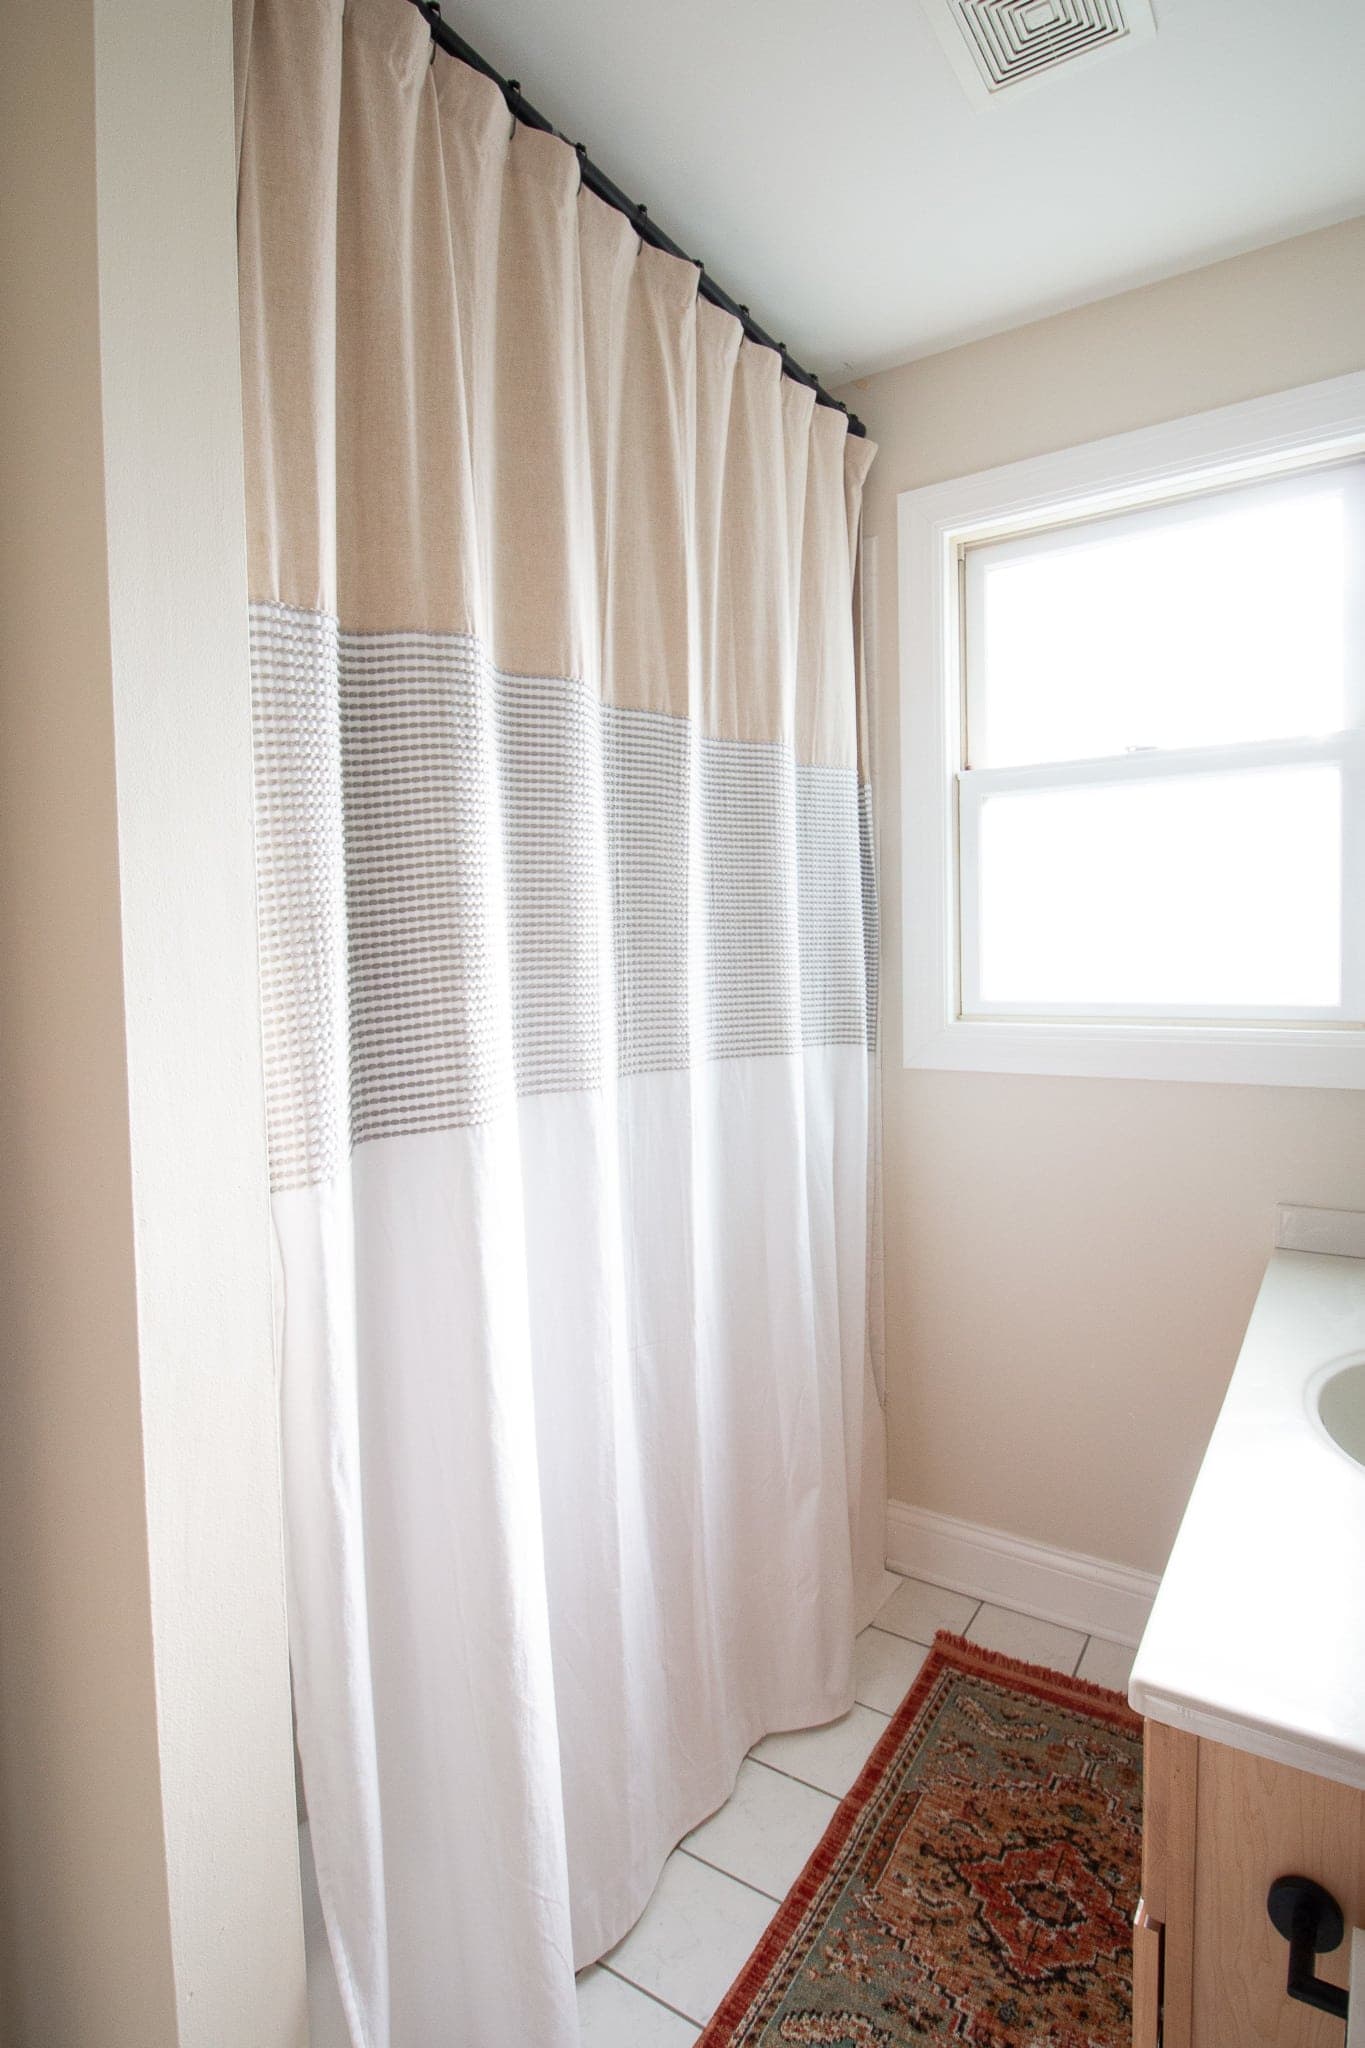 Use an XL shower curtain to hide ugly shower tile